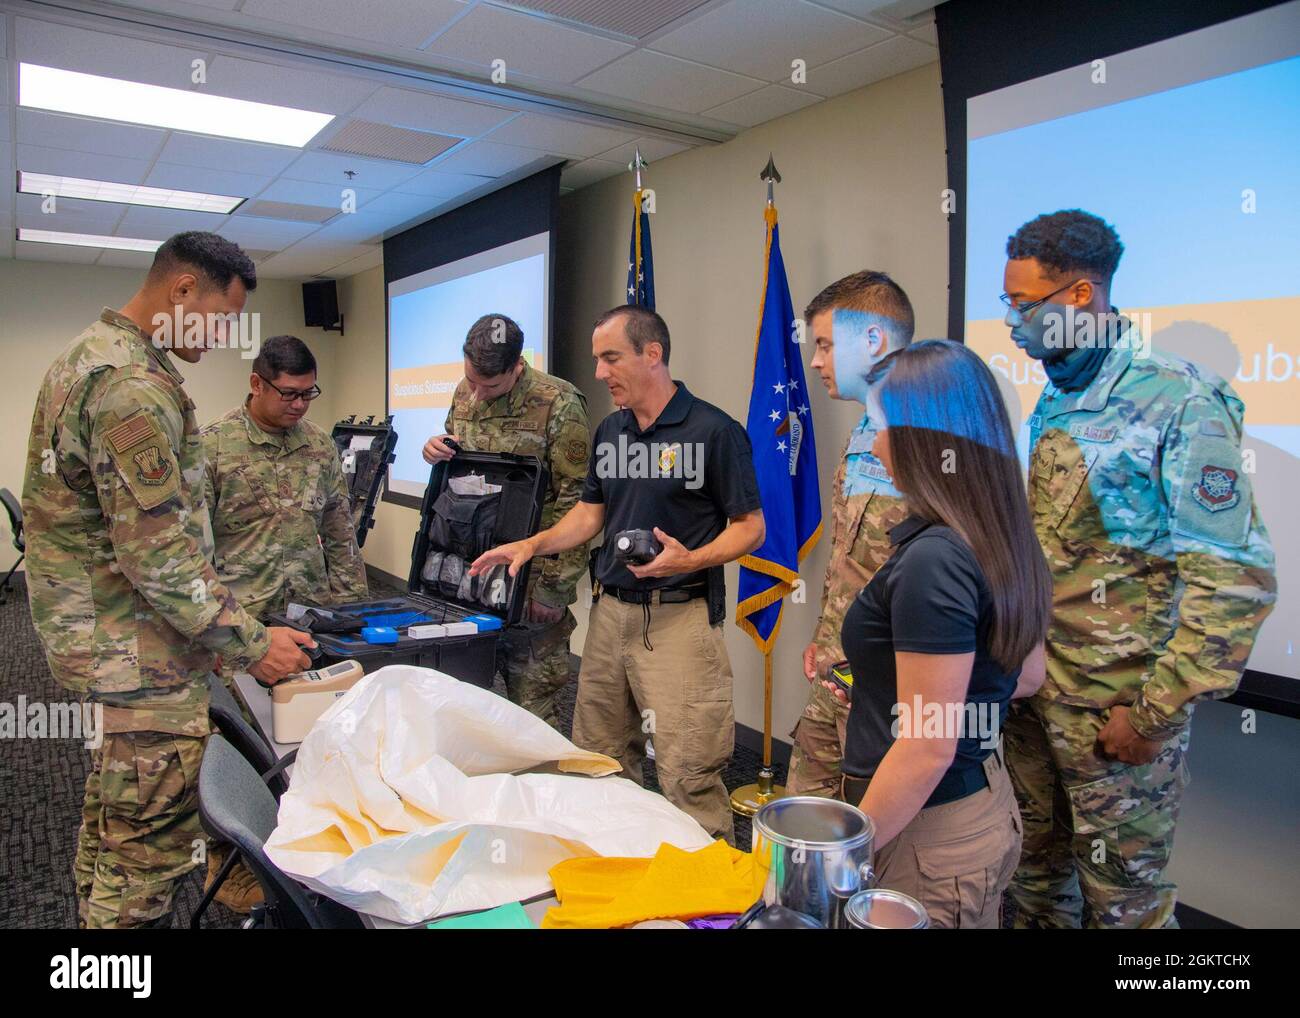 Special agents from the Federal Bureau of Investigations (FBI) and Airmen from the 6th Air Refueling Wing inspect hazardous material (HAZMAT) gear at MacDill Air Force Base, Florida, June 28, 2021. The FBI conducted a weapons of mass destruction and HAZMAT crime scene training in order to further advance its partnership with MacDill and to keep the surrounding community safe. Stock Photo